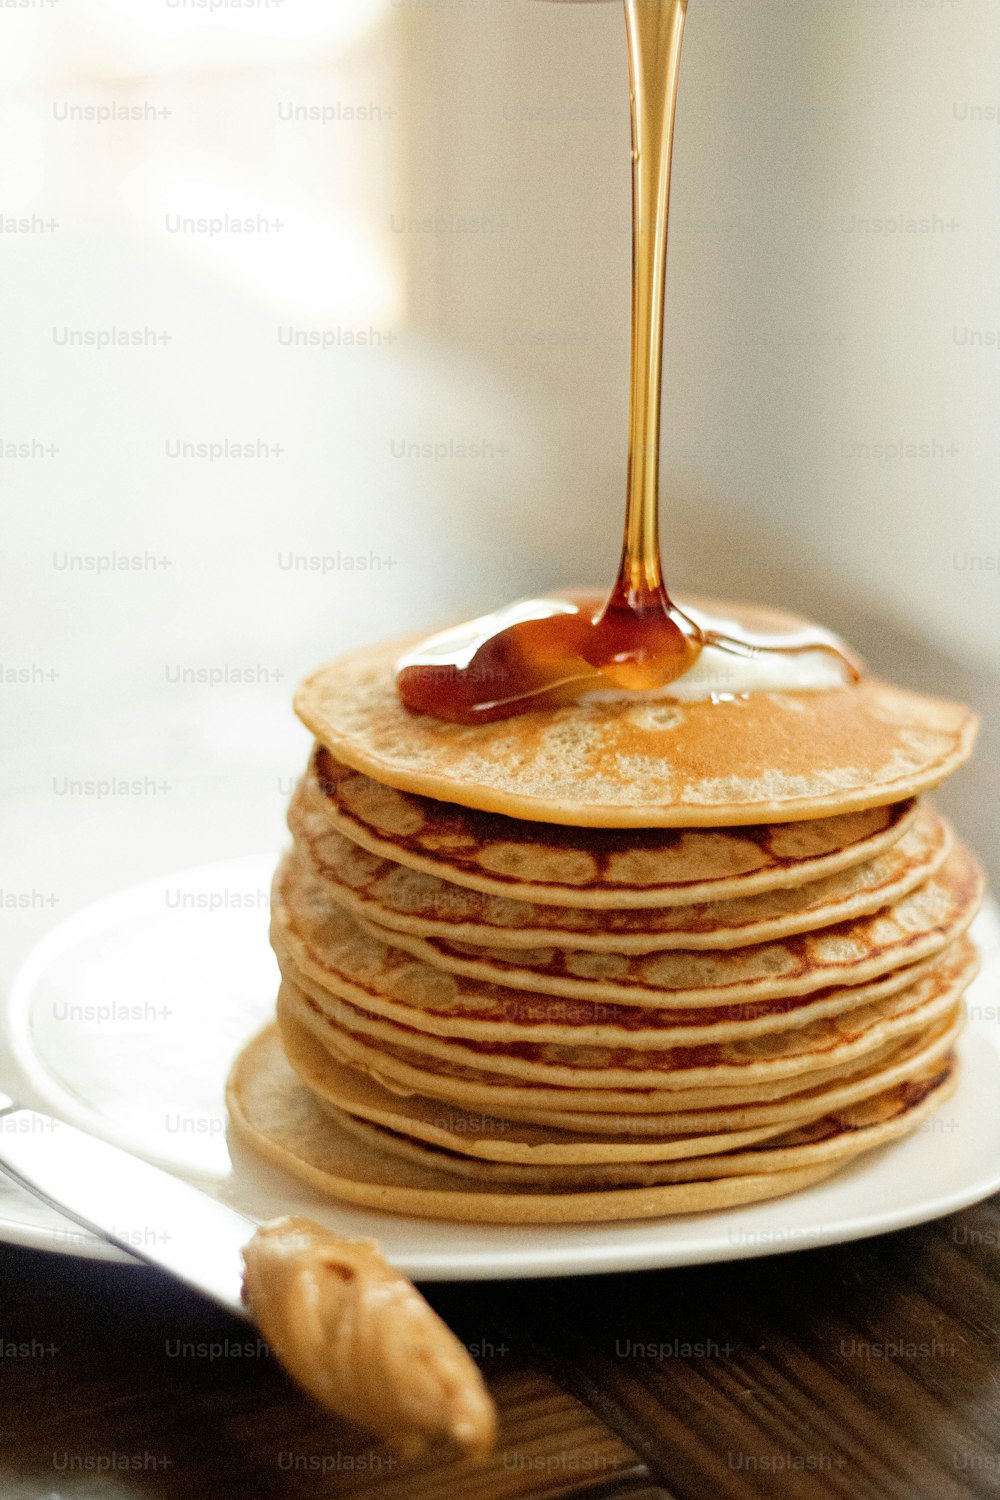 a stack of pancakes with syrup being poured on top